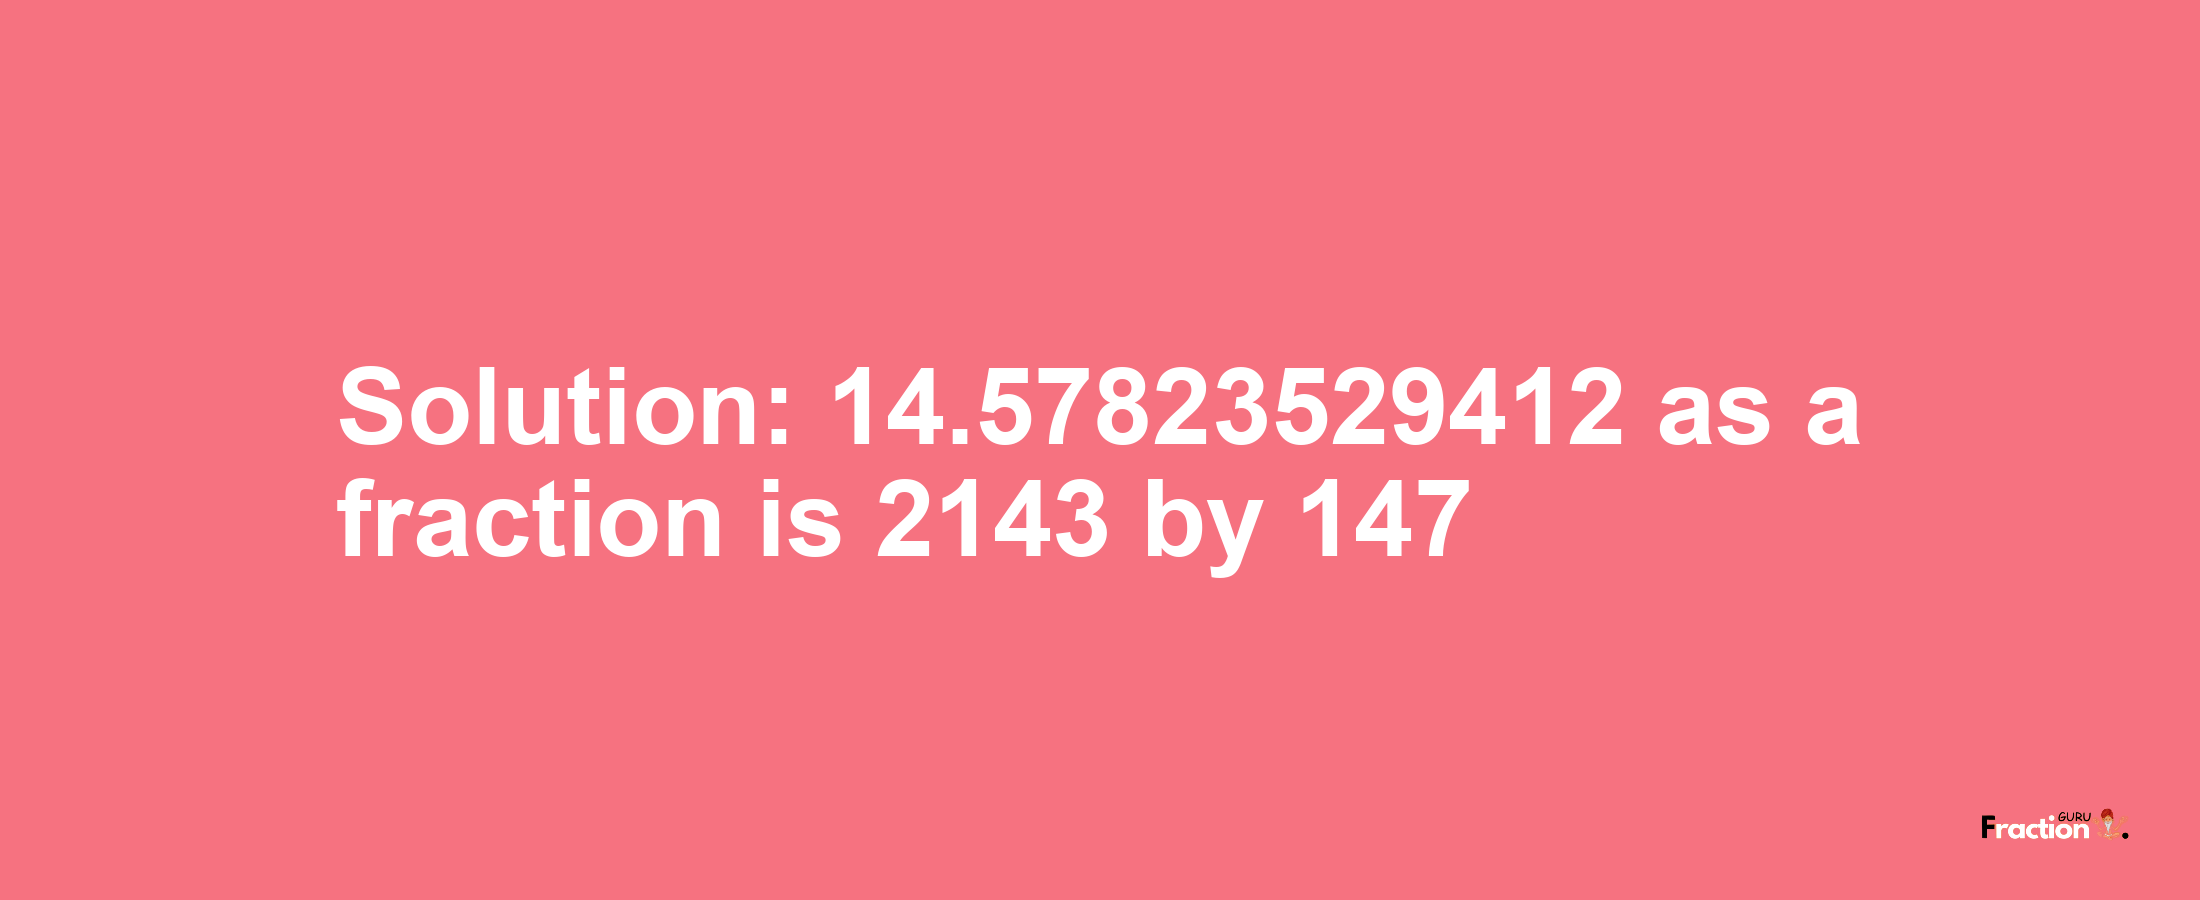 Solution:14.57823529412 as a fraction is 2143/147